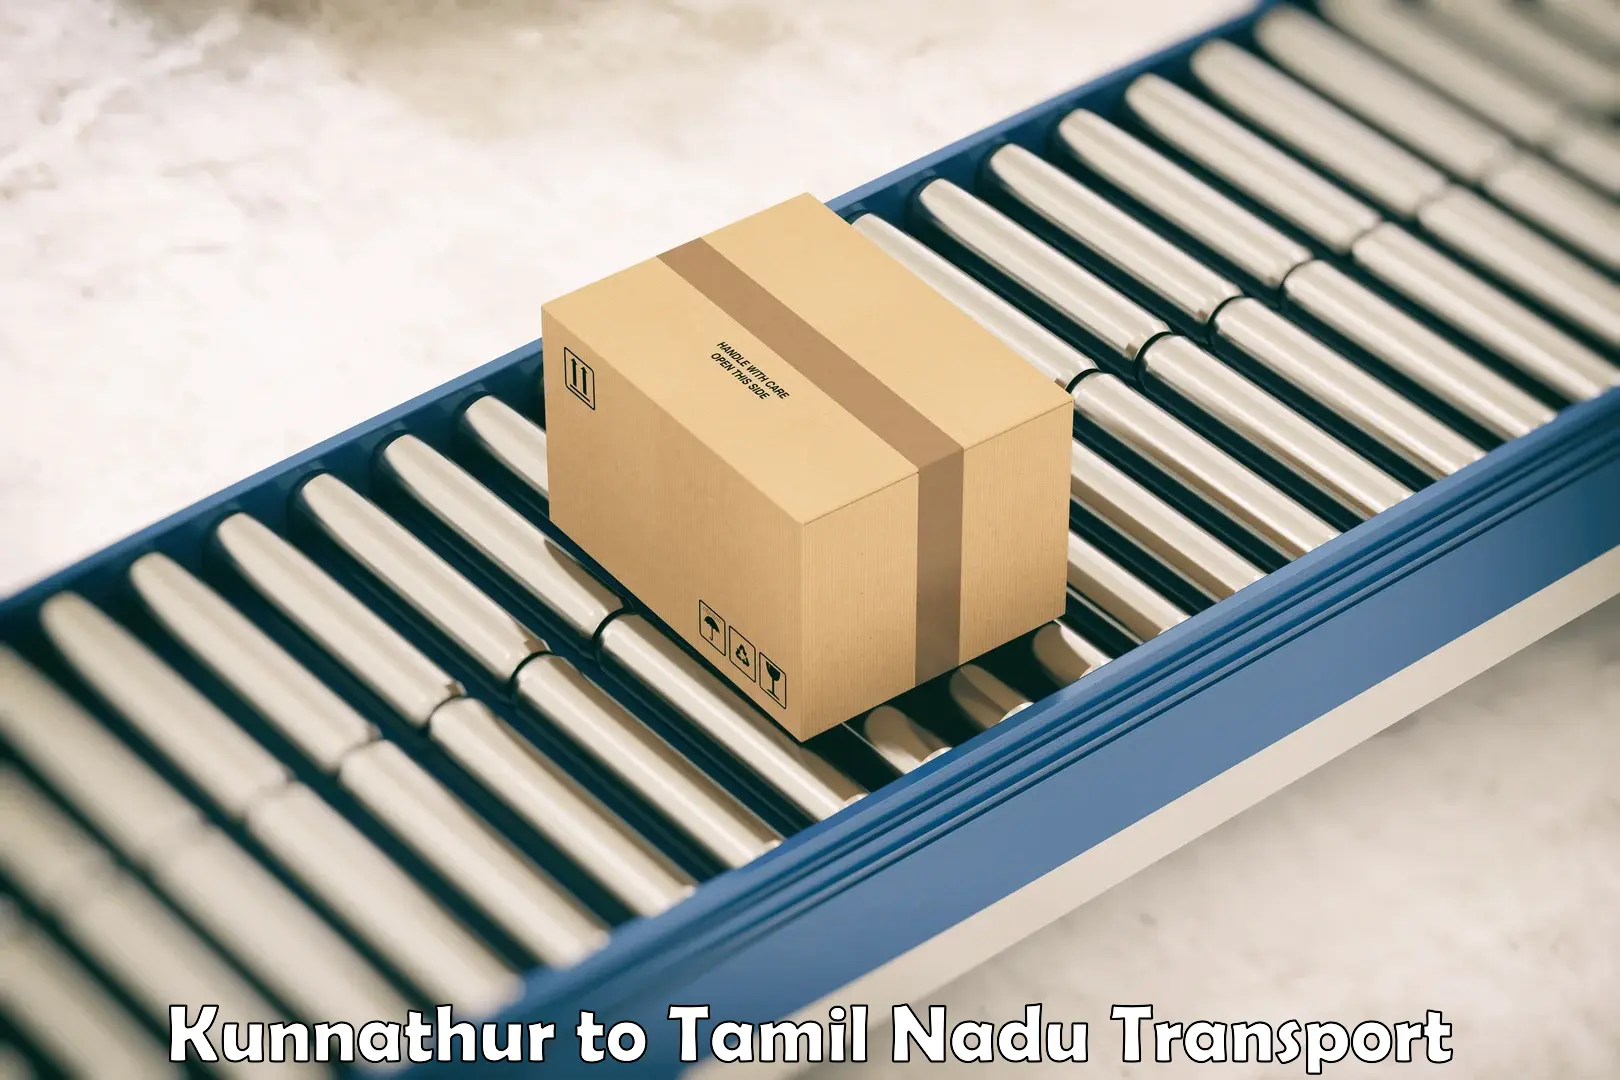 Air freight transport services in Kunnathur to Mettur